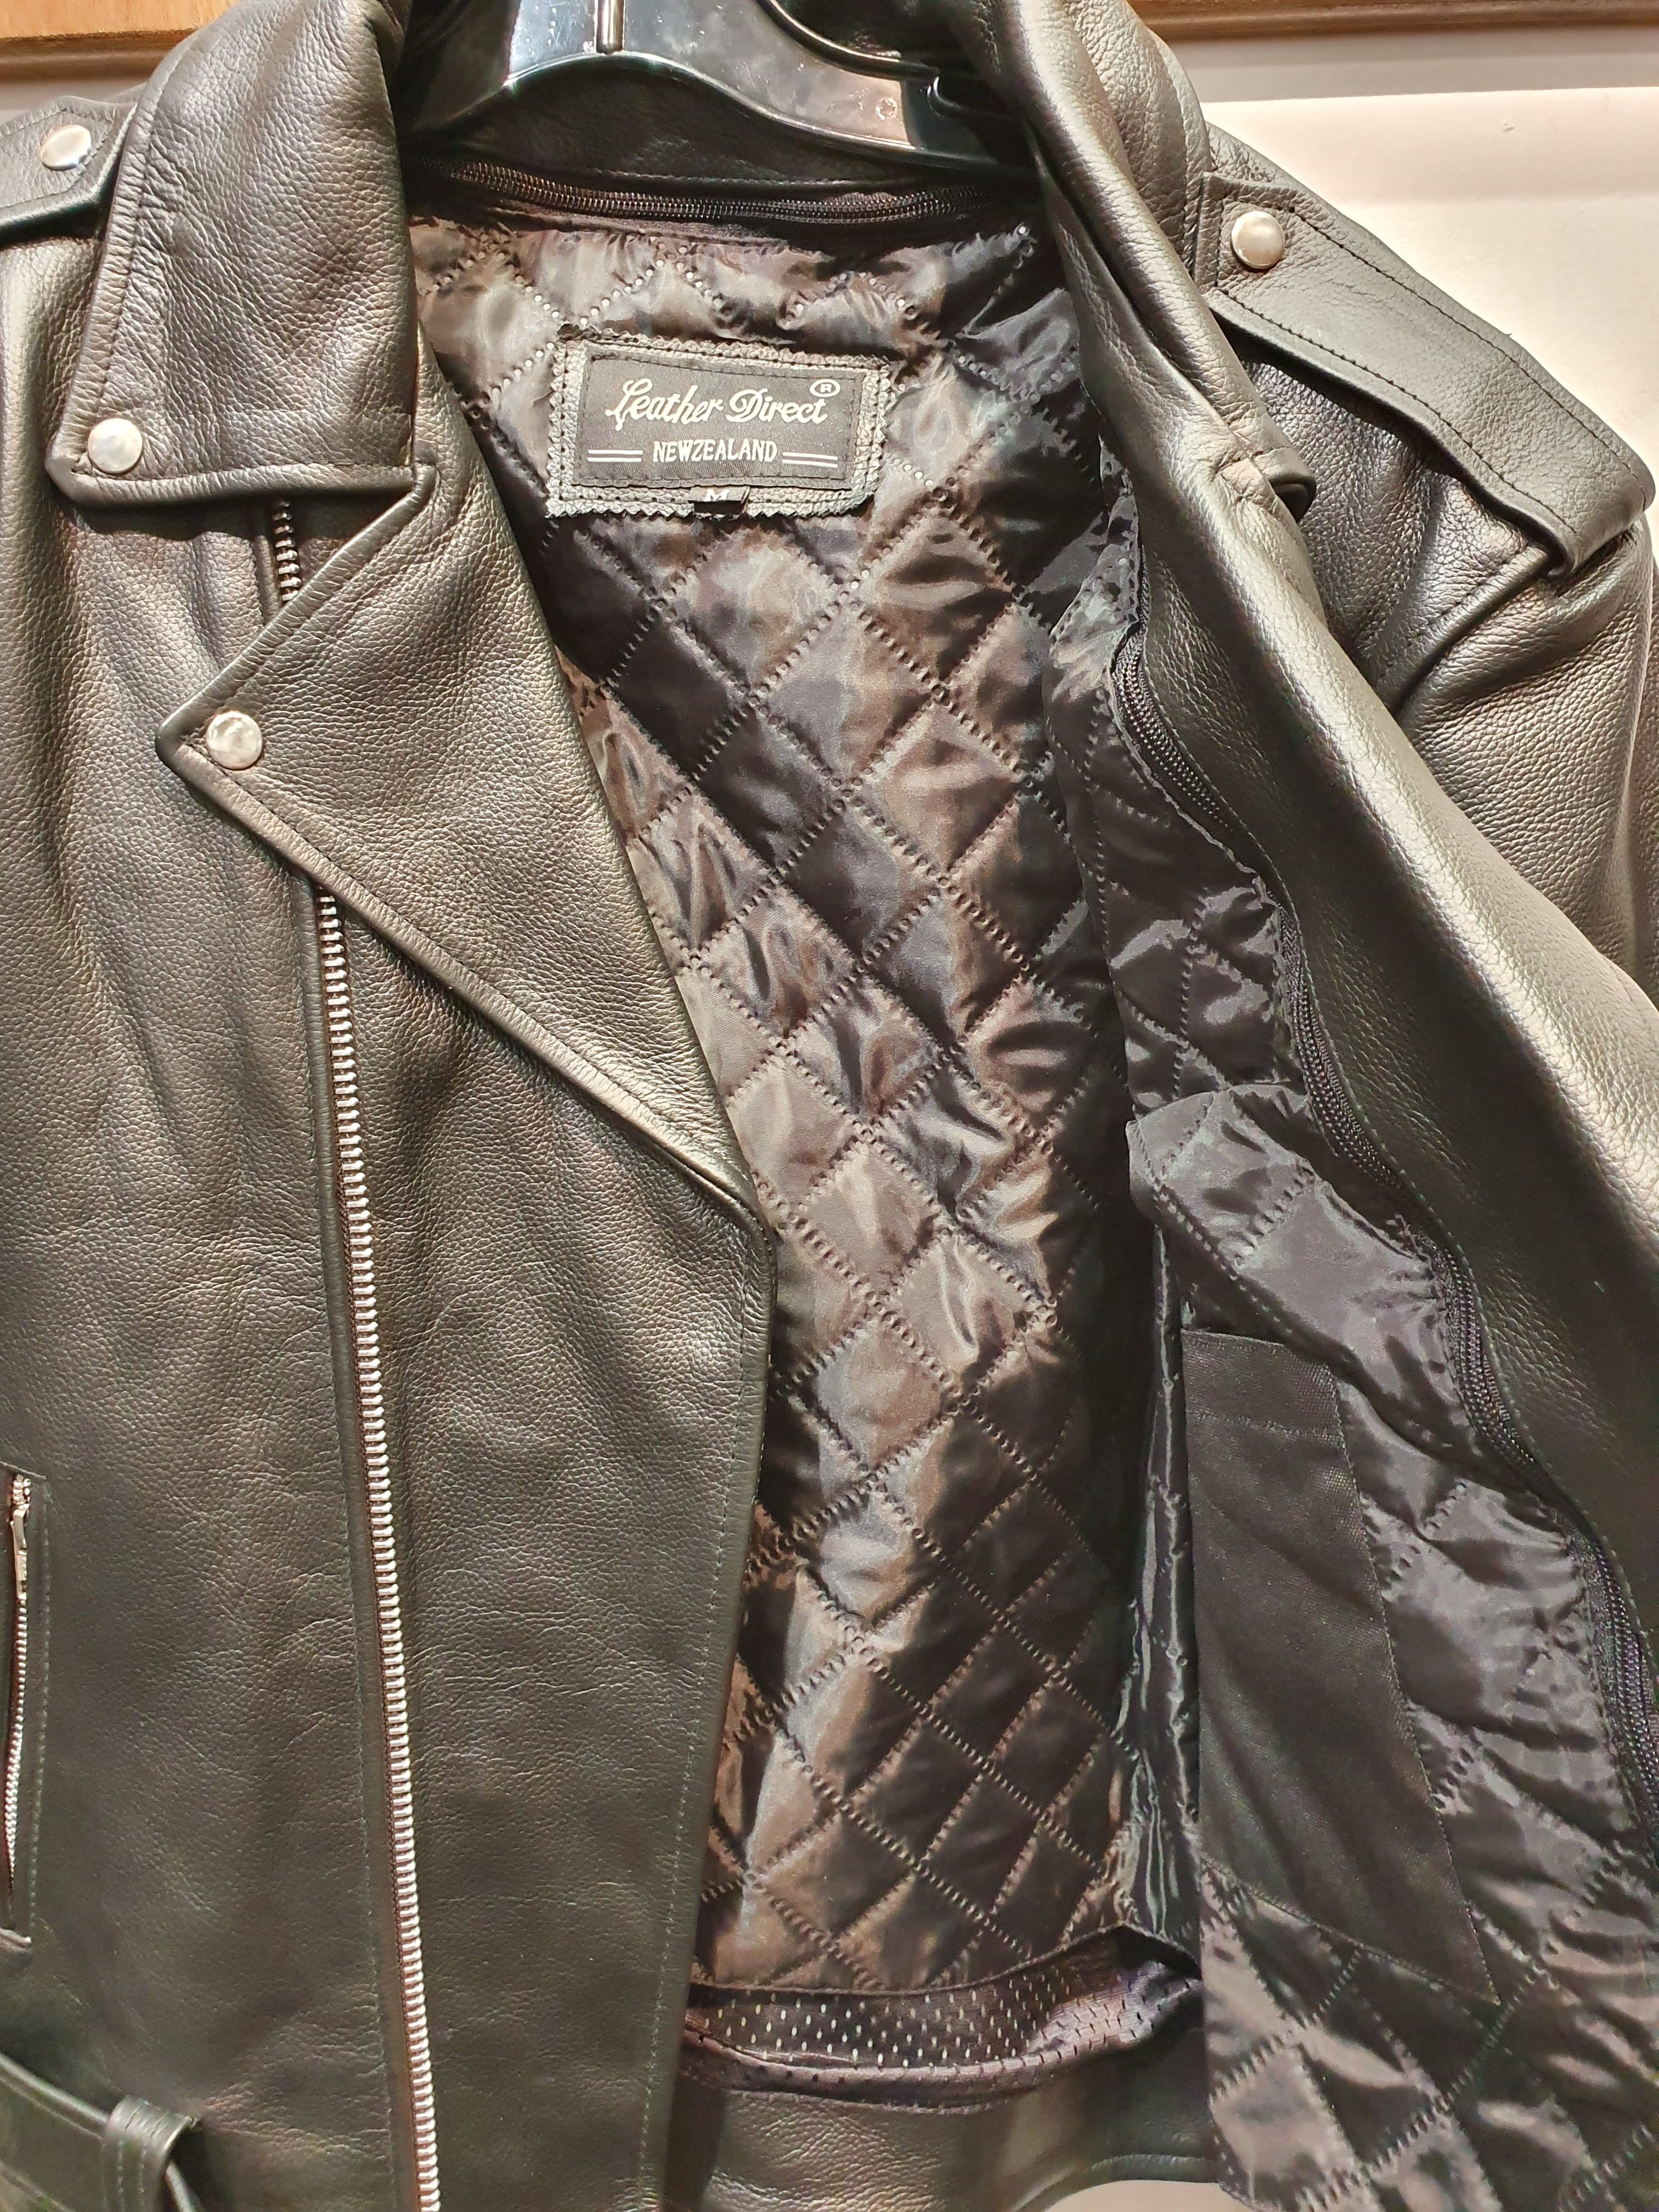 NAS PMC LEATHER JACKET - Leather Direct